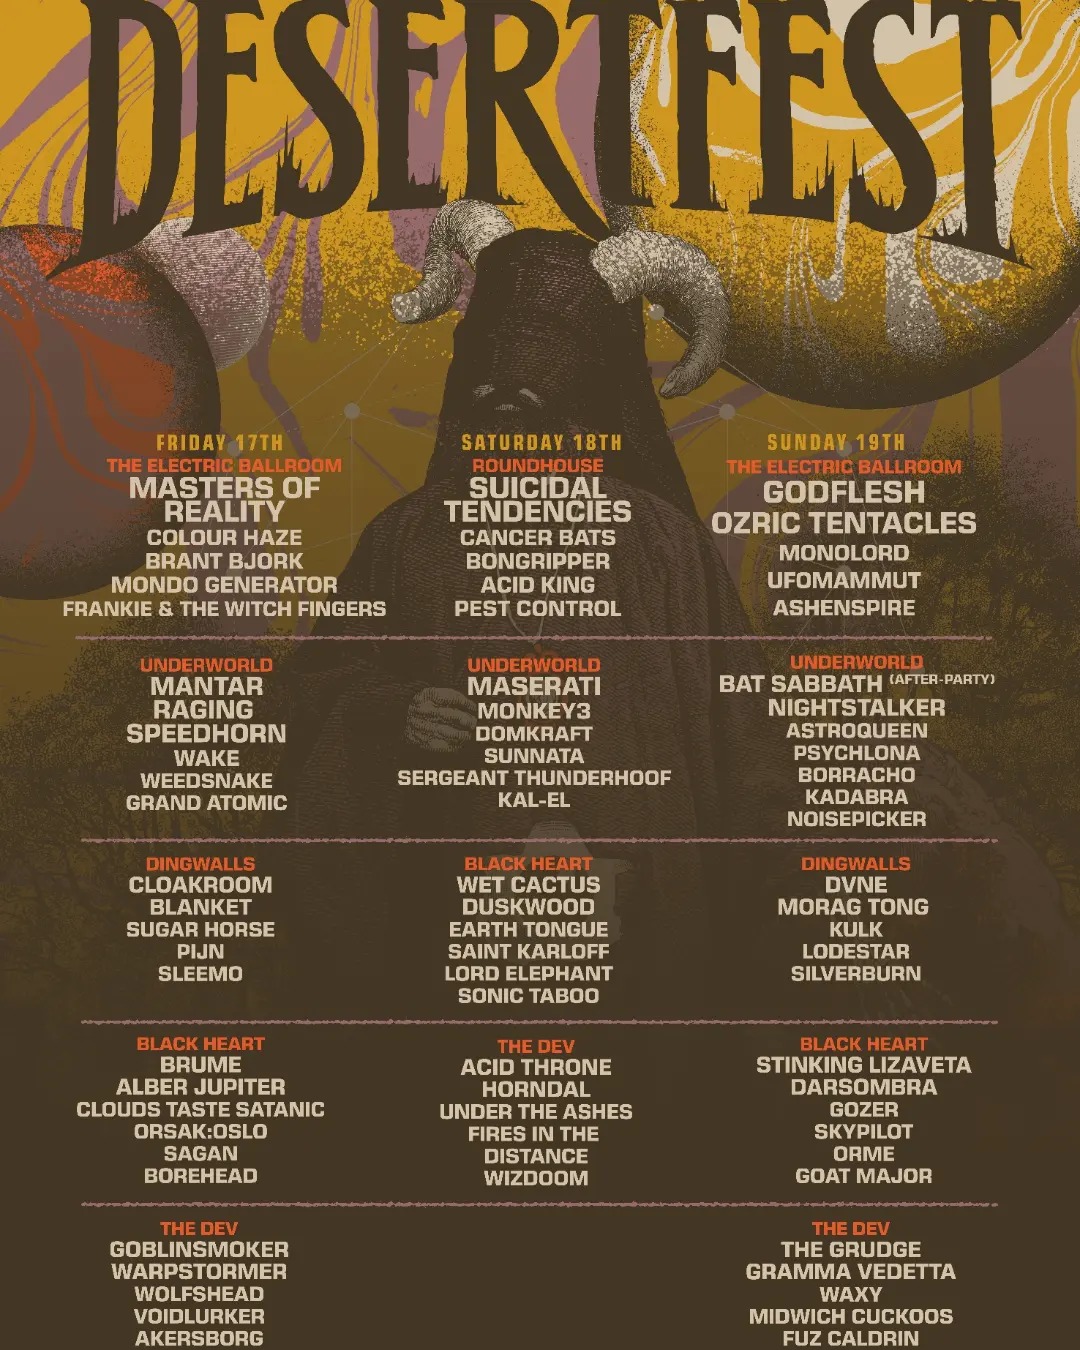 Desertfest London announced day-split and venues